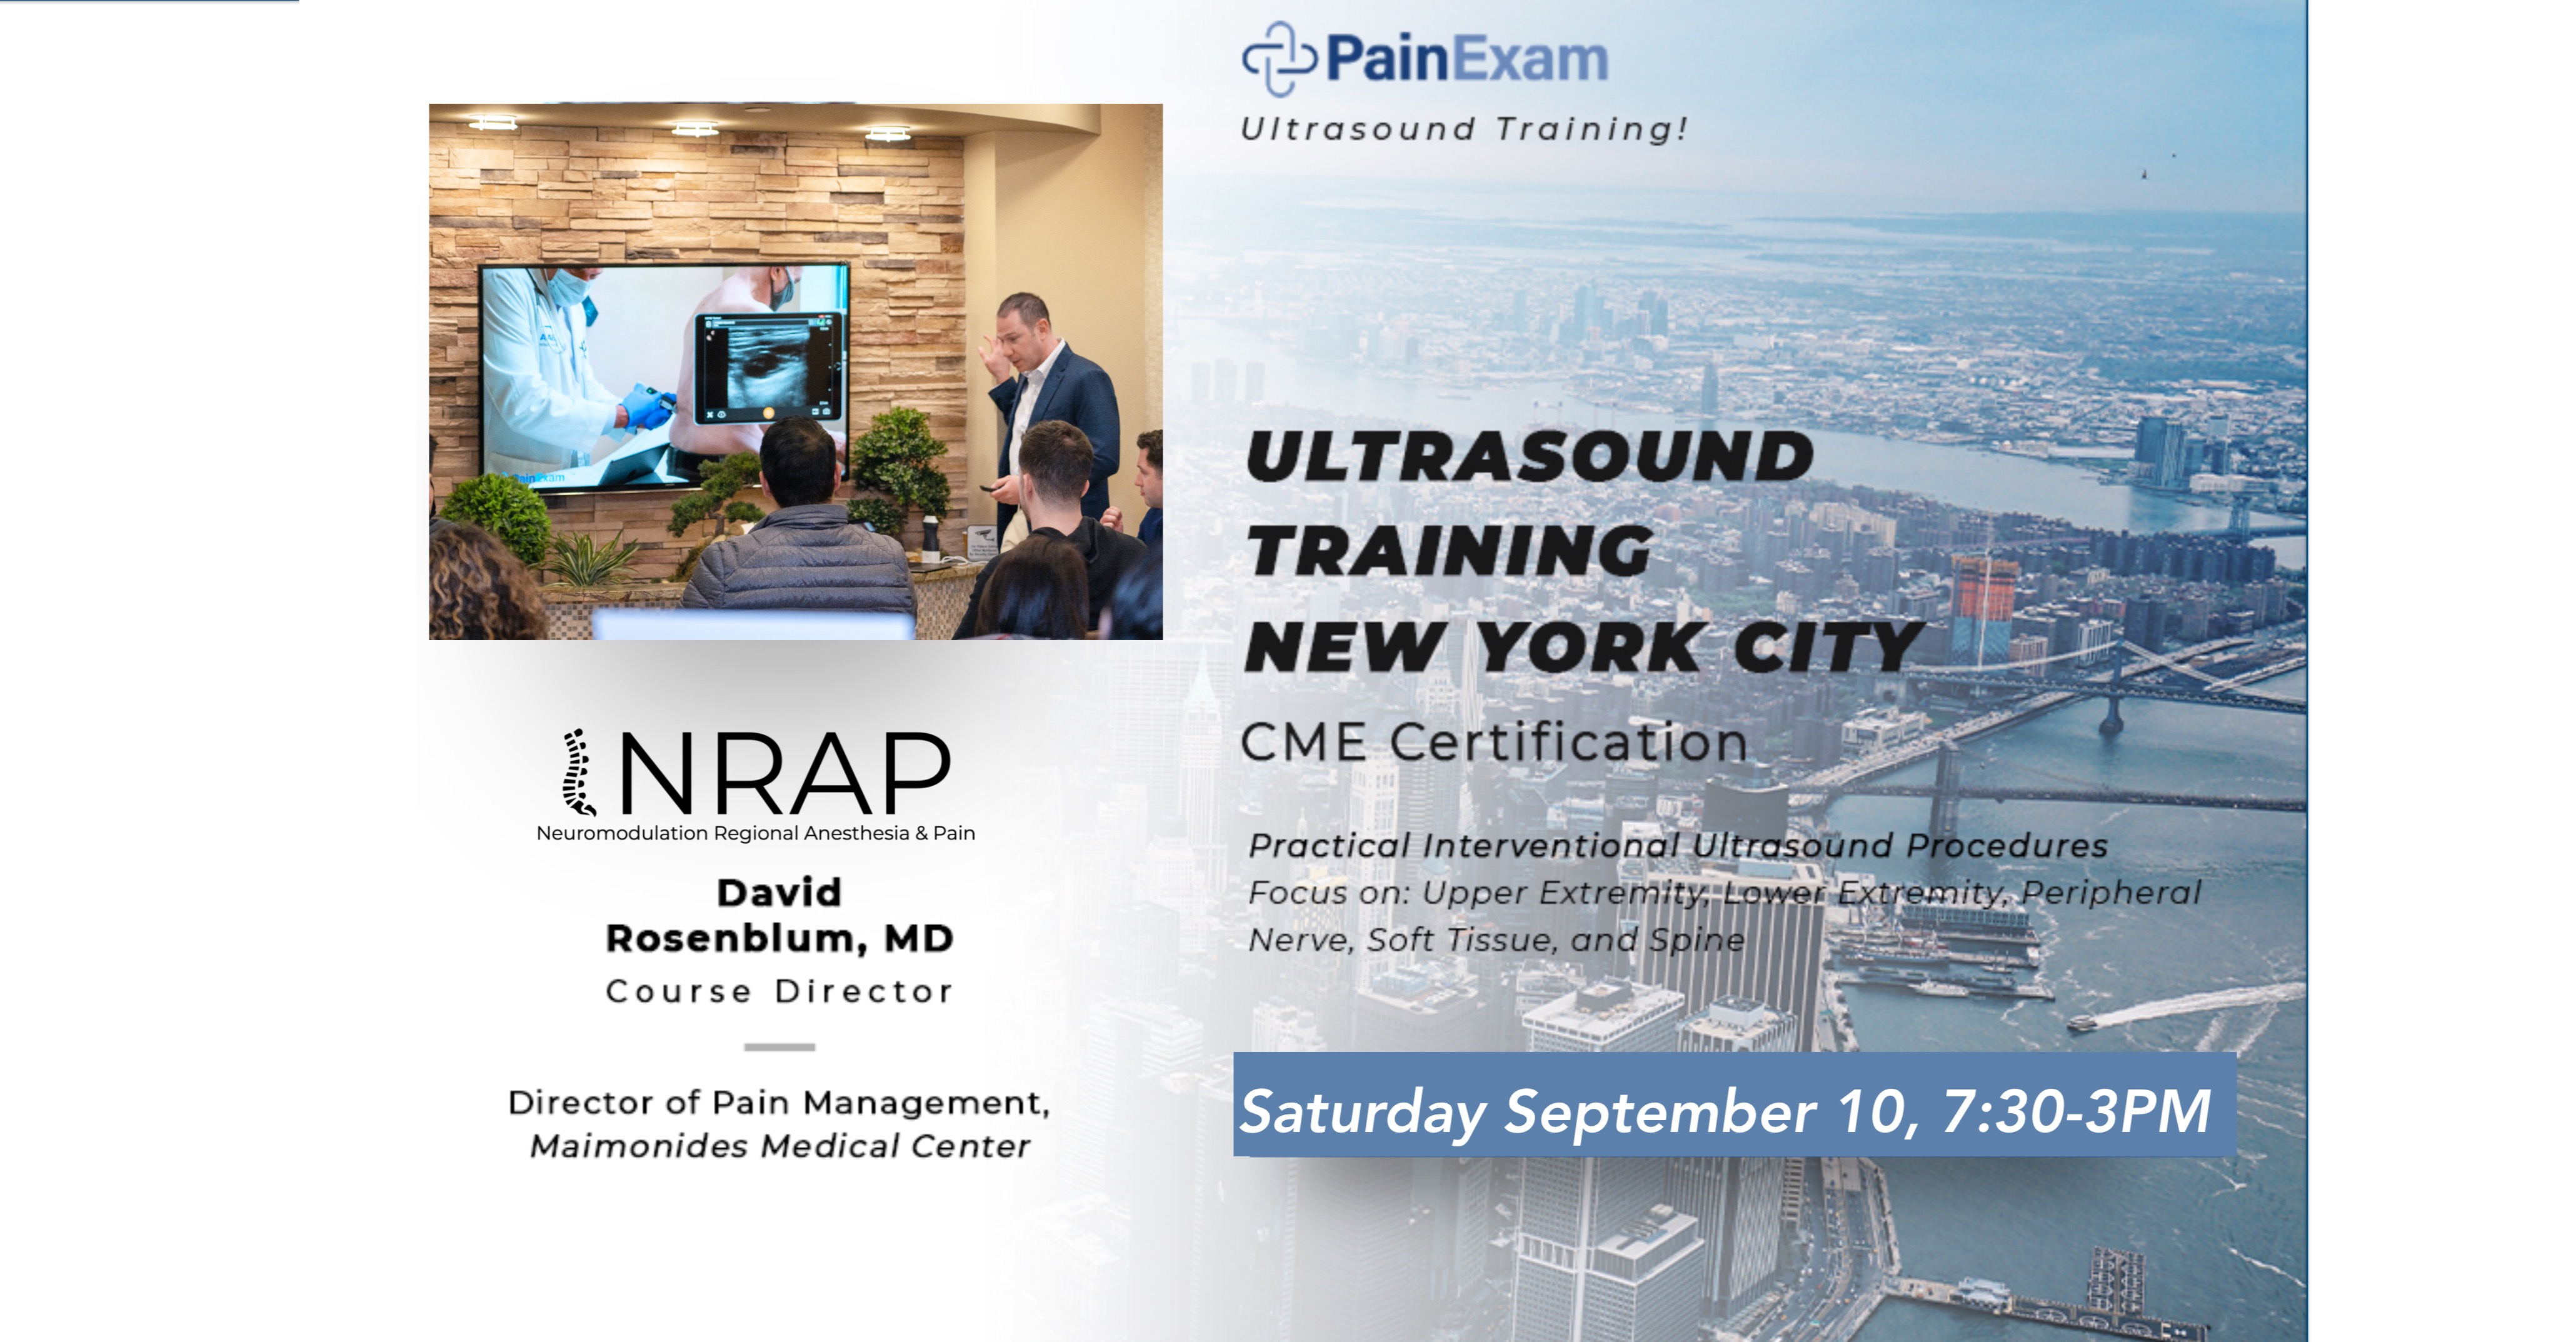 Ultrasound Guided Interventional Pain and Regional Anesthesiology Workshops